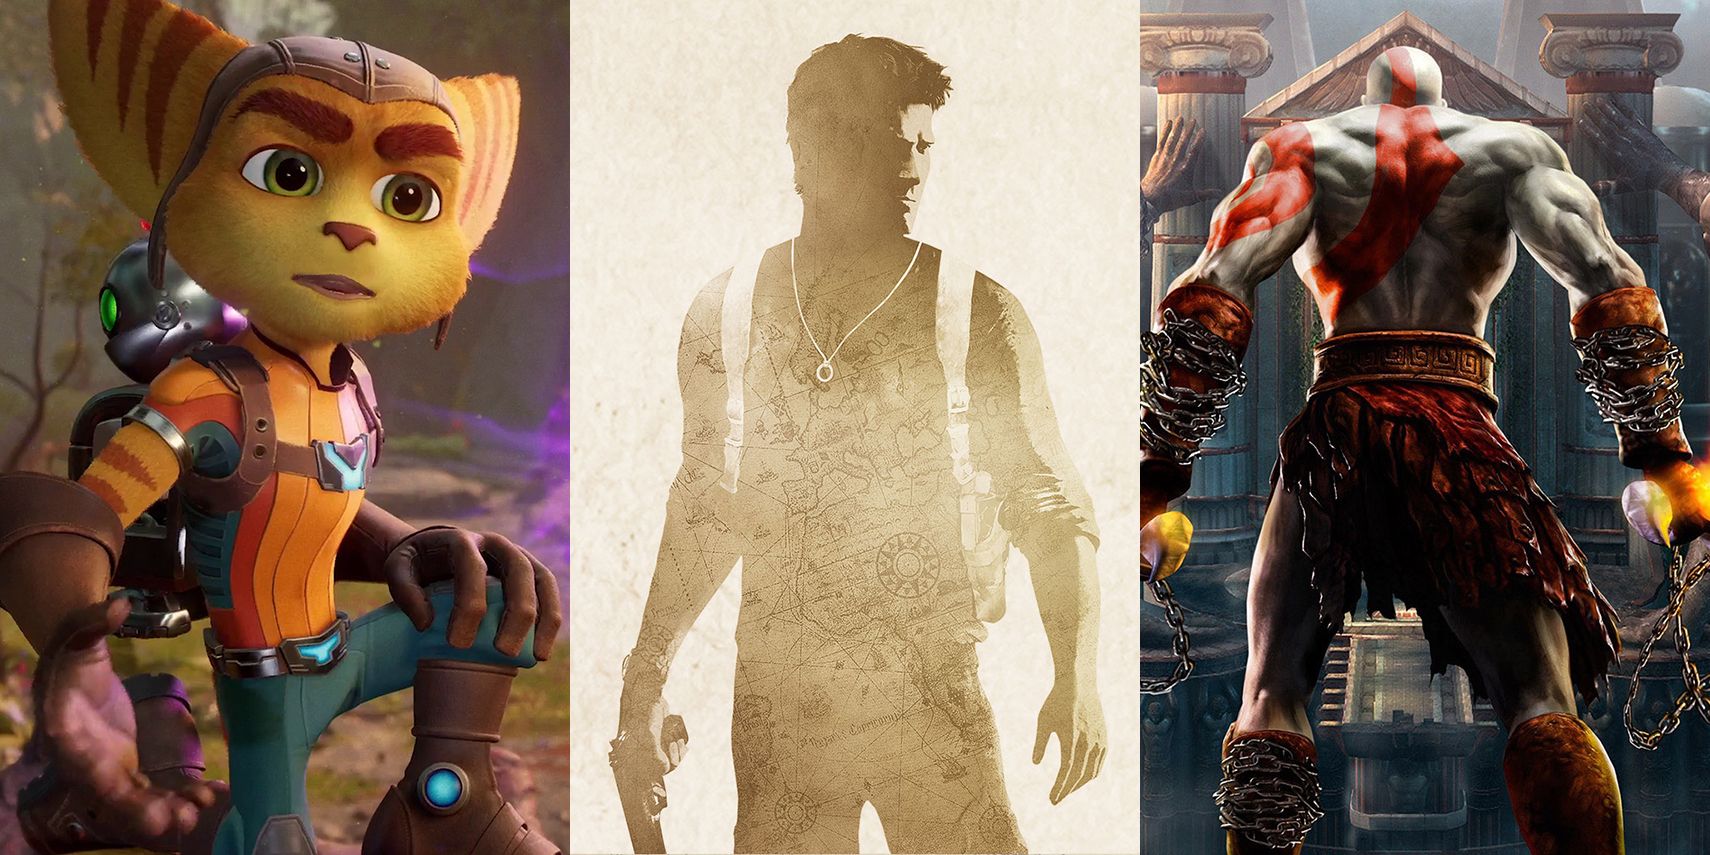 PS4 Exclusive Games, PlayStation Exclusives